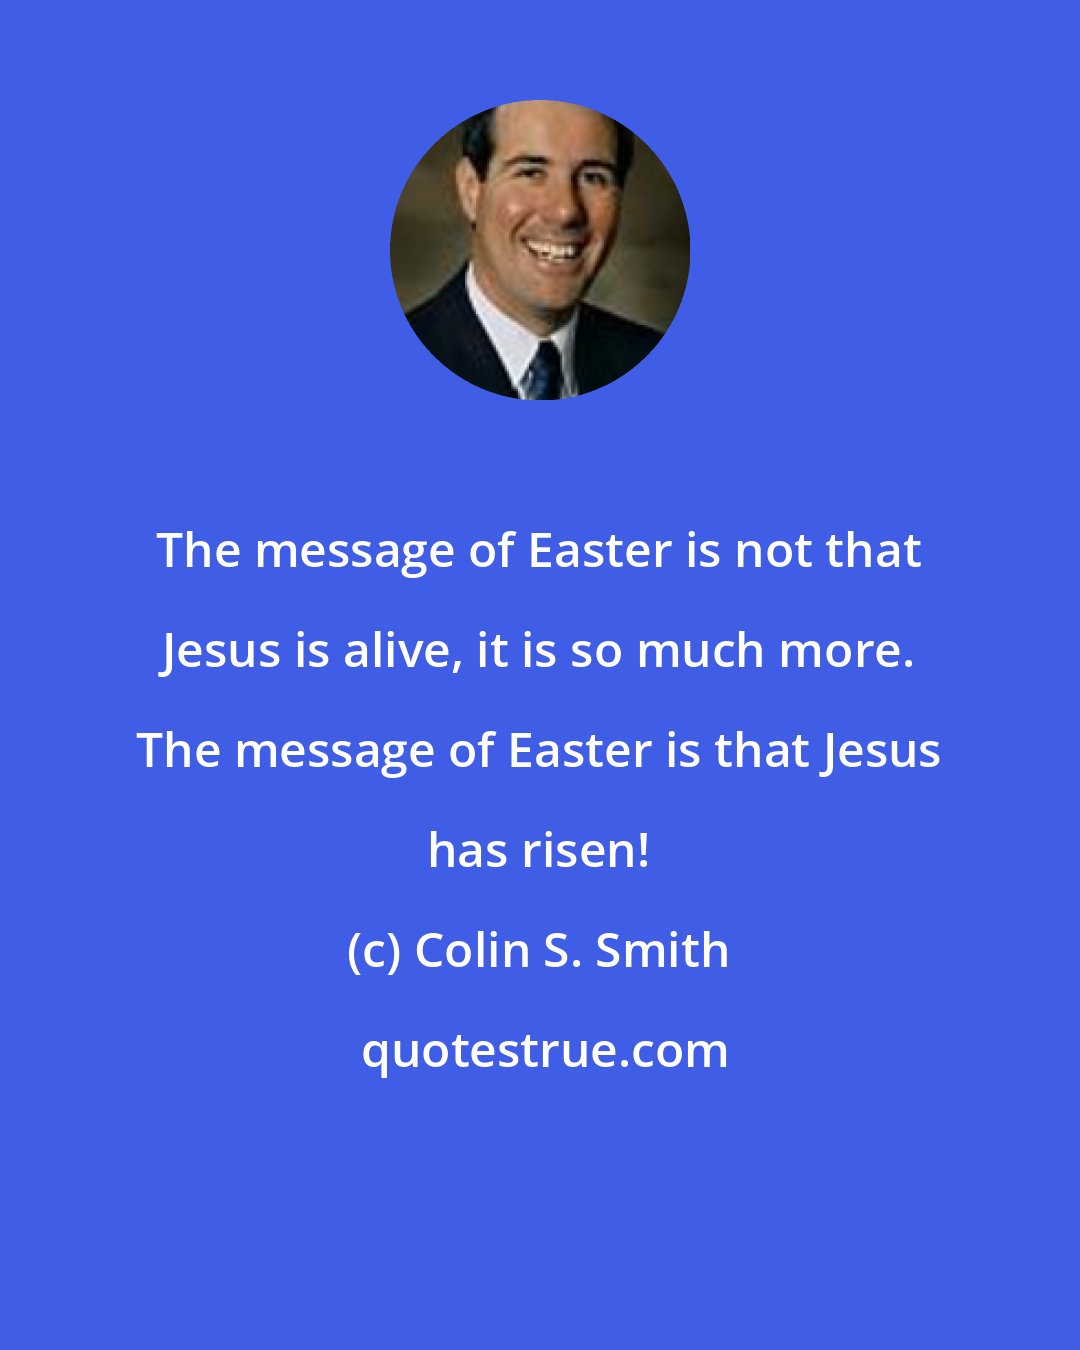 Colin S. Smith: The message of Easter is not that Jesus is alive, it is so much more. The message of Easter is that Jesus has risen!